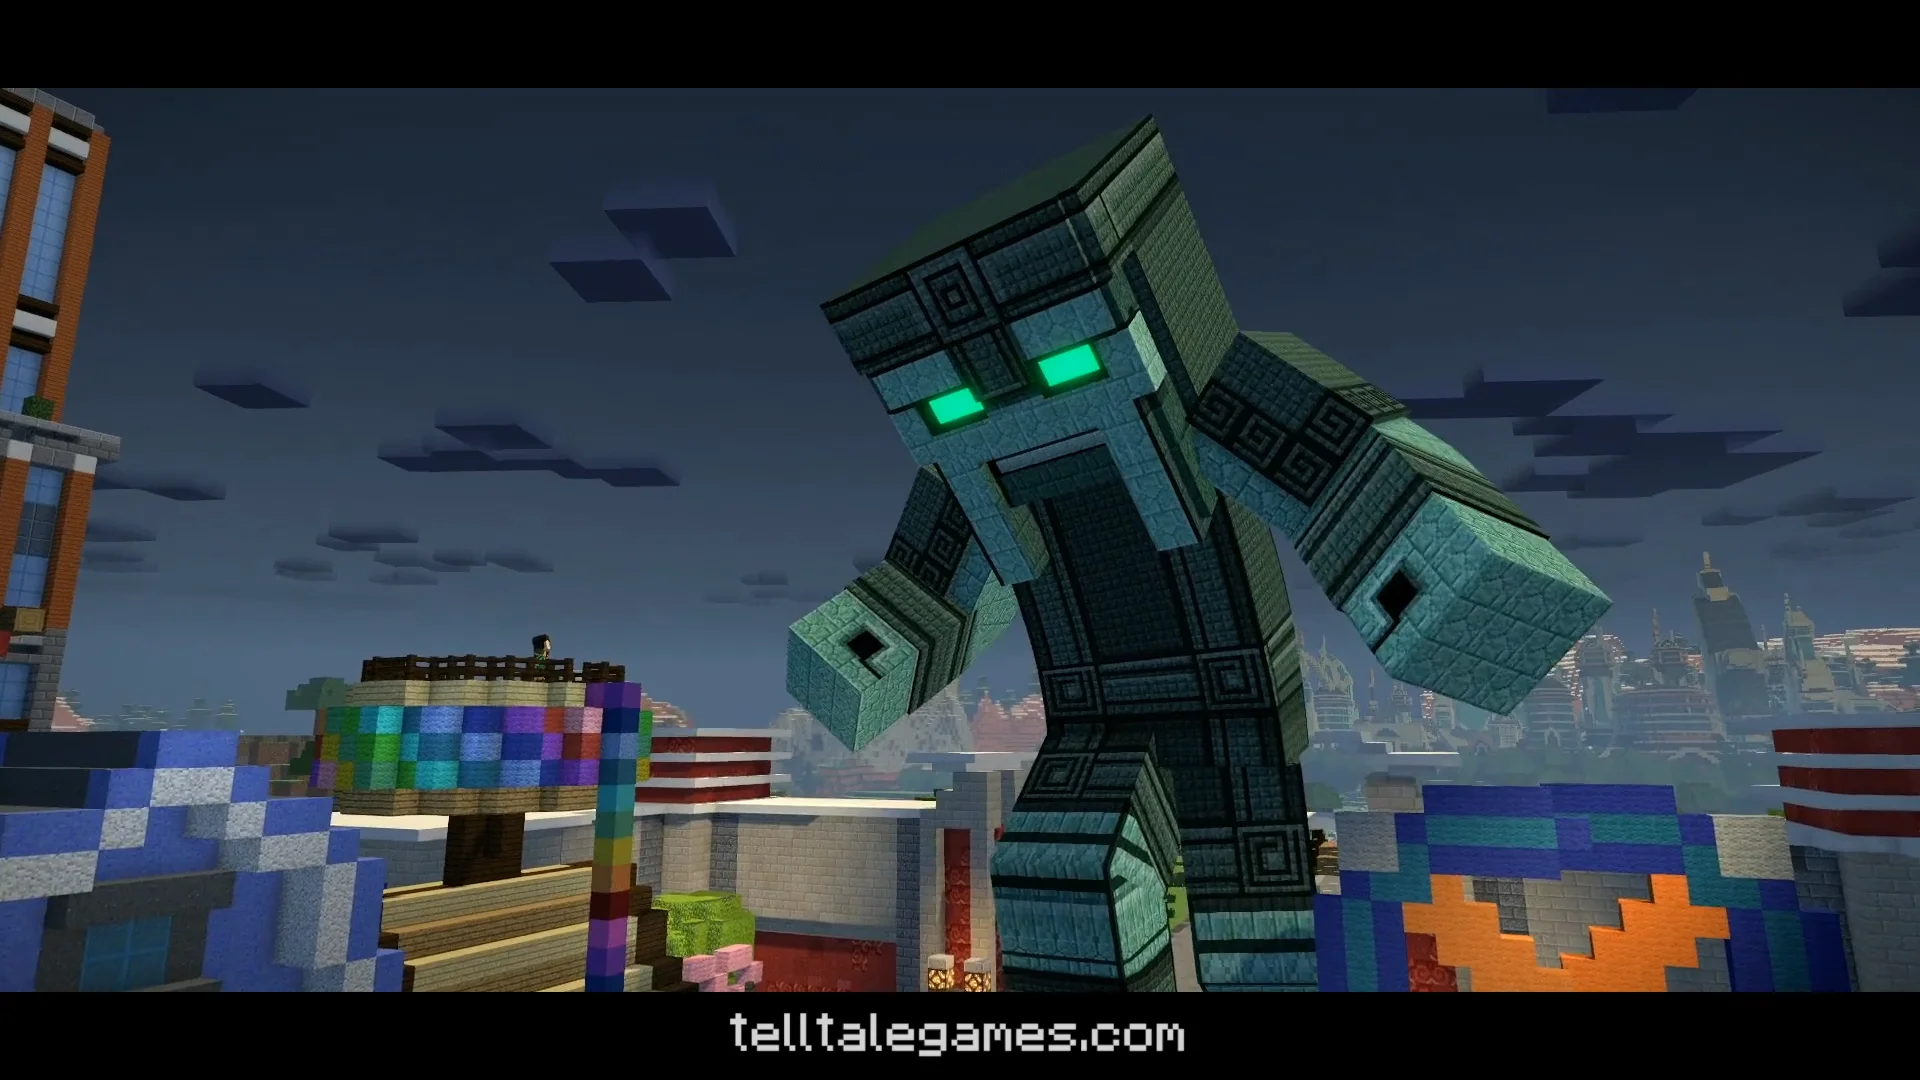 Minecraft: Story Mode – Season Two: Episode 2 – Giant Consequences trailer  on Vimeo